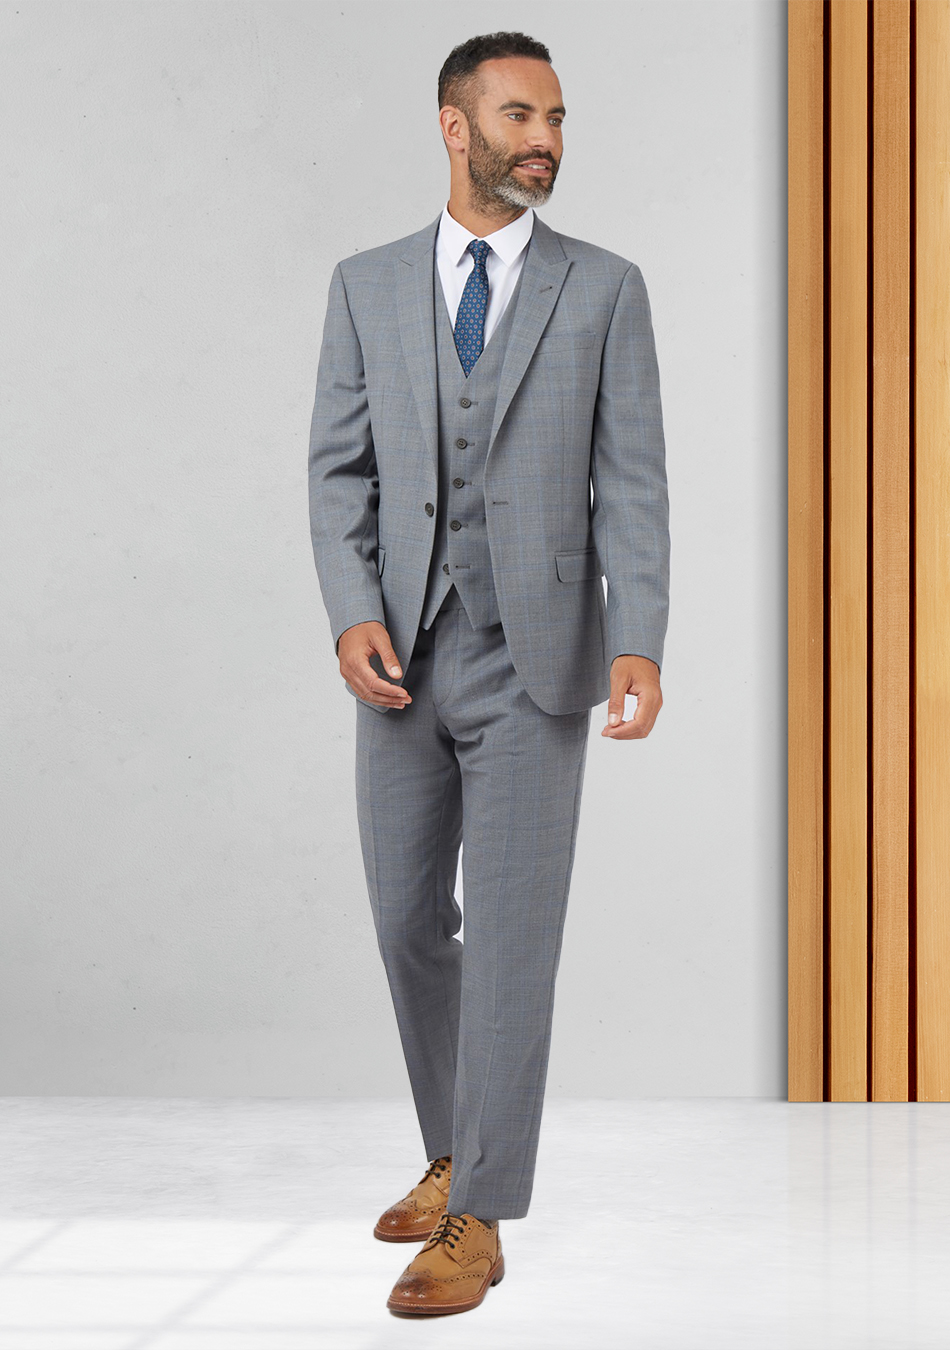 Grey three-piece suit, white shirt, and tan derby shoes